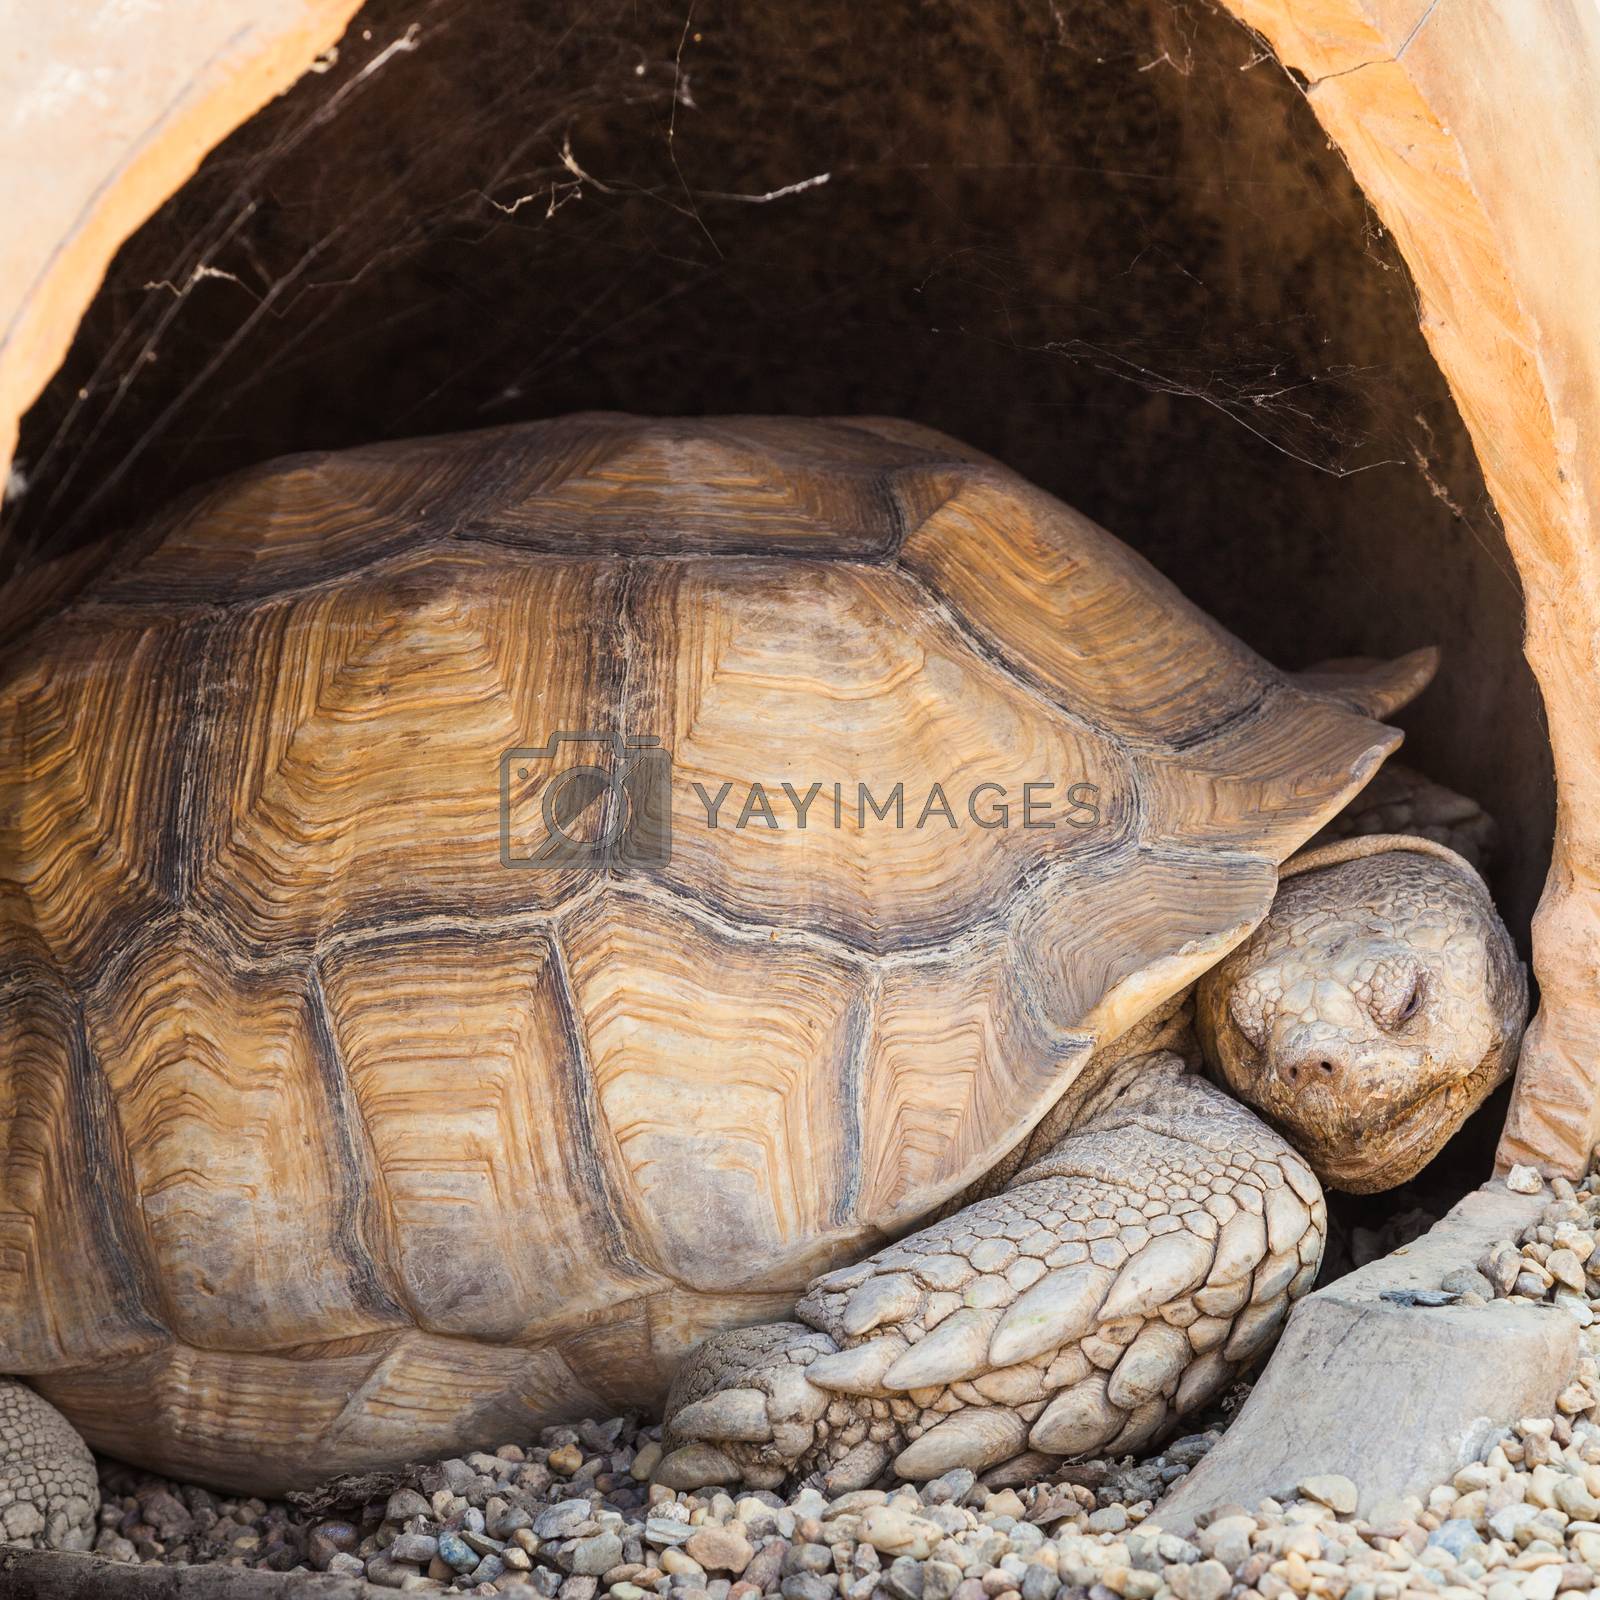 Royalty free image of African Spurred Tortoise by Perseomedusa